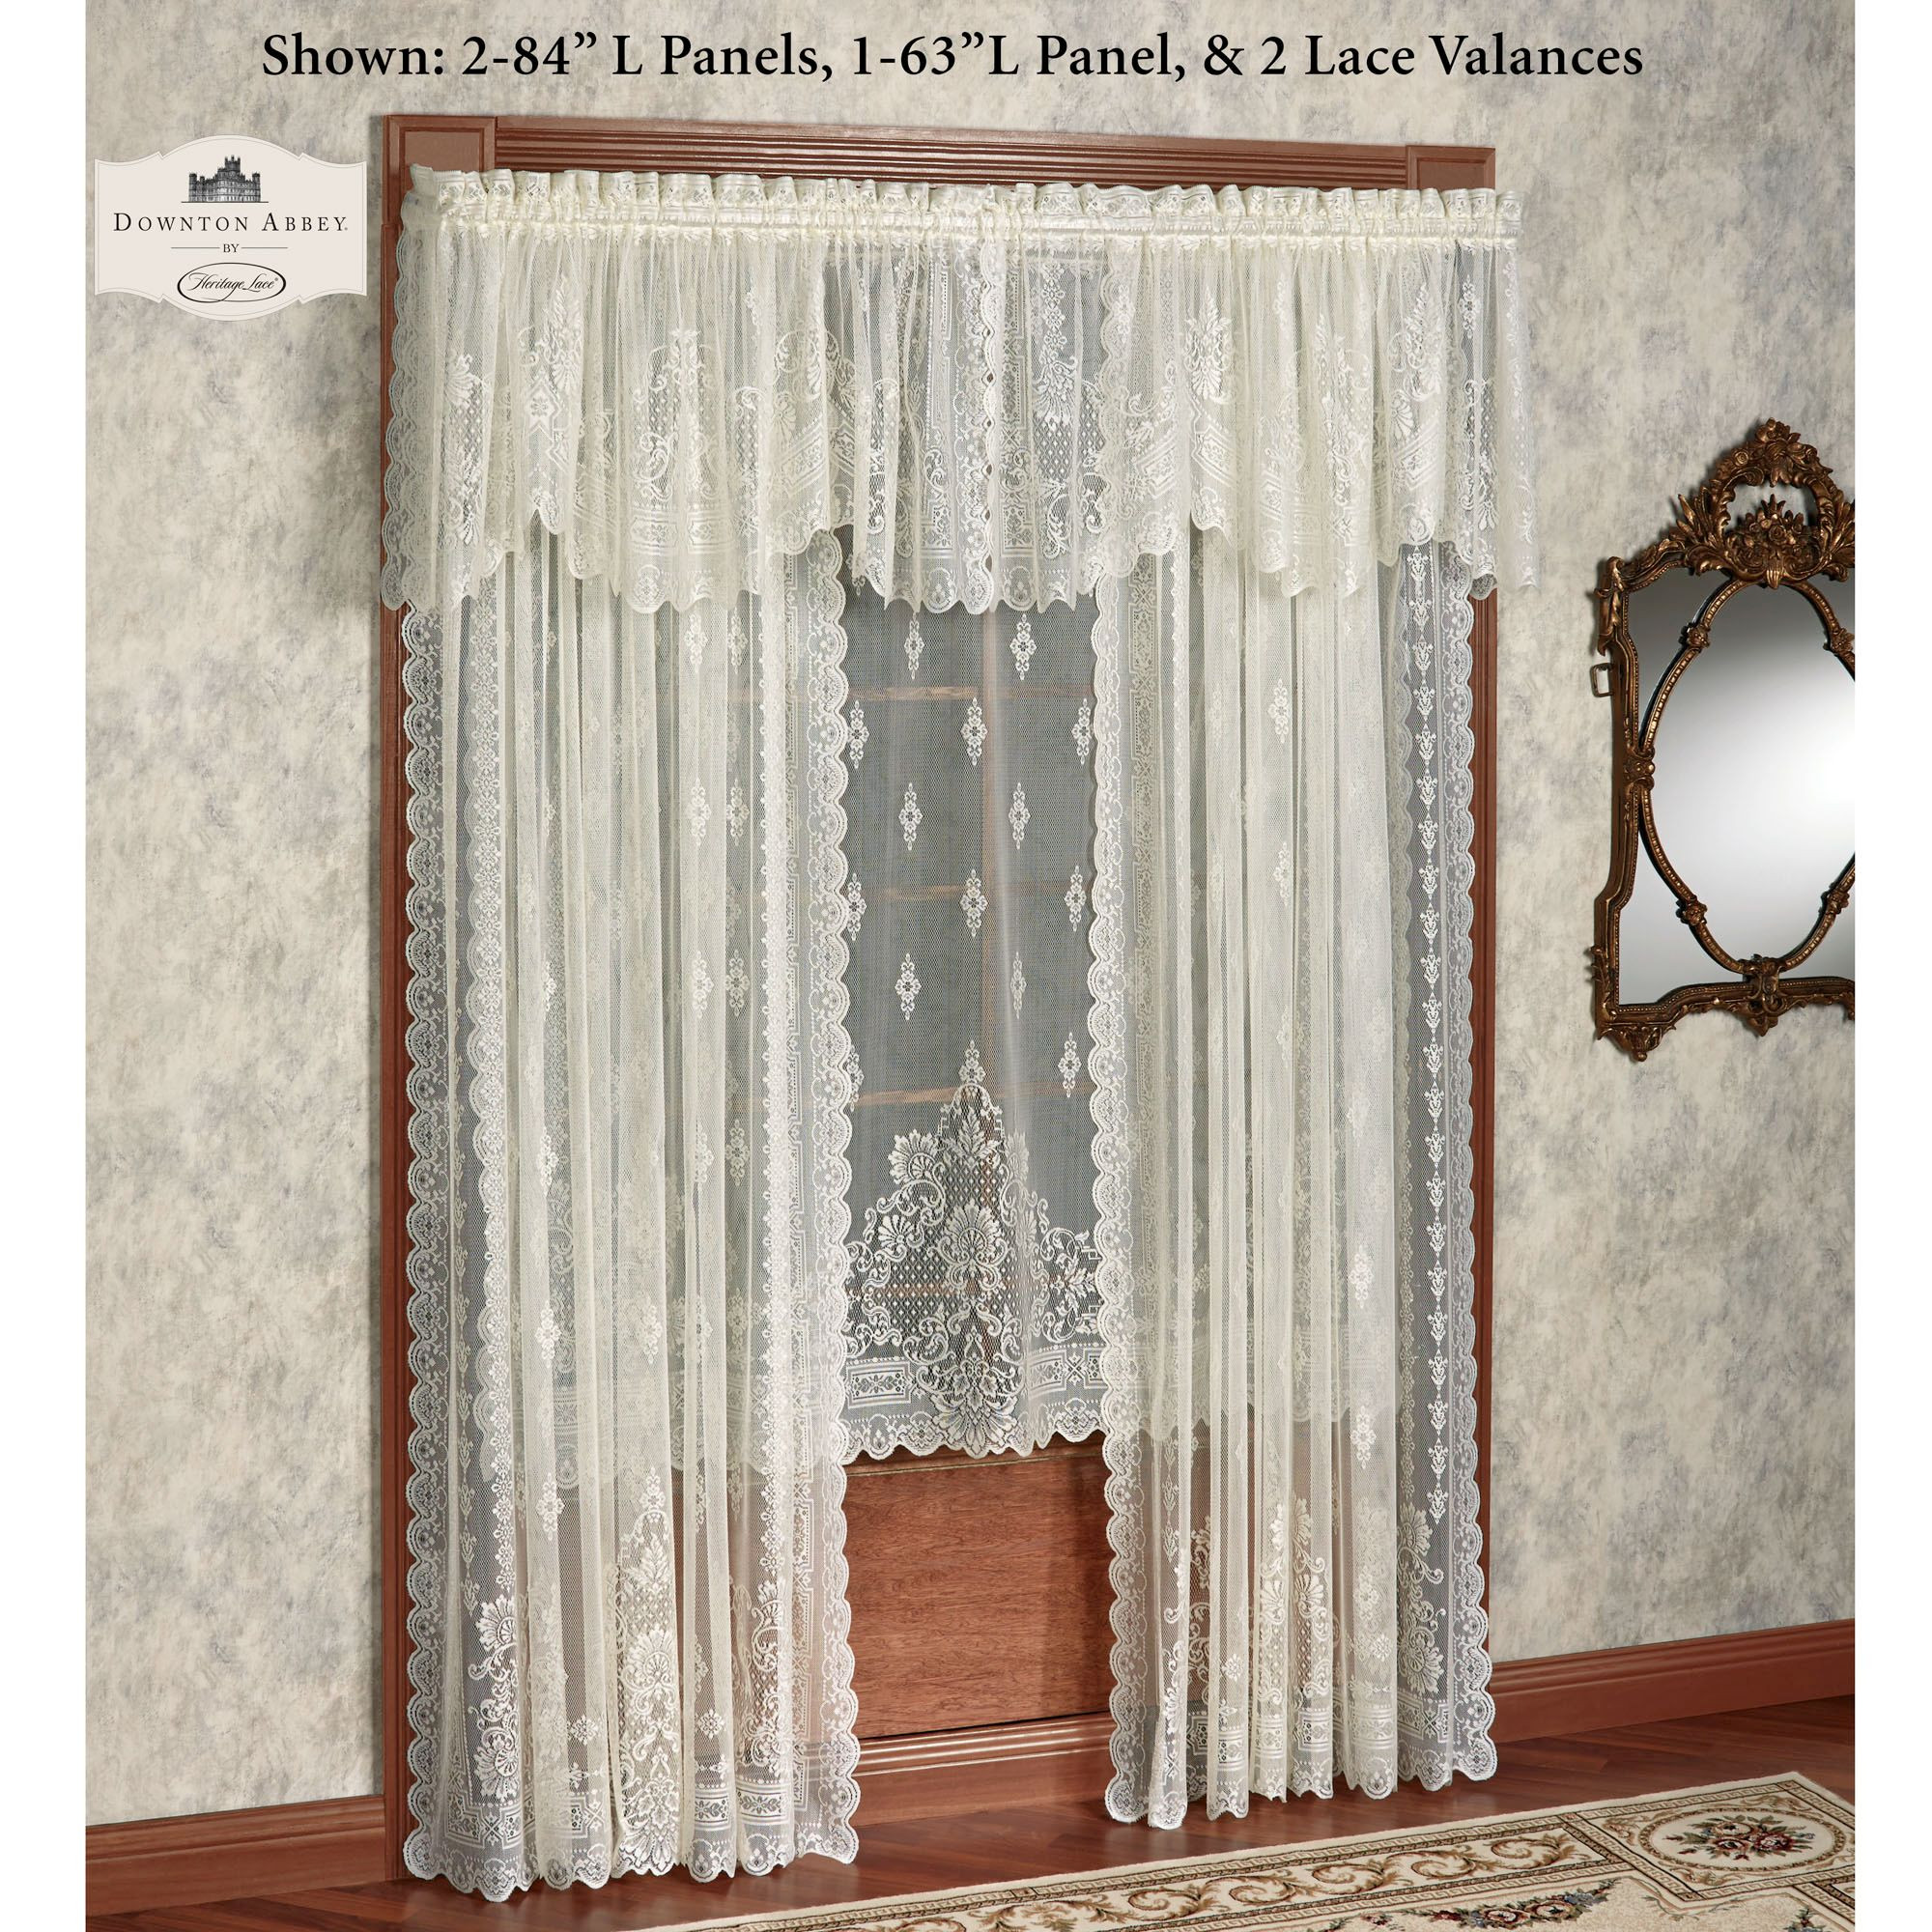 Jcpenney Curtains Kitchen
 26 Jcpenney Curtain Sconces Decor Enchanting Jcpenney